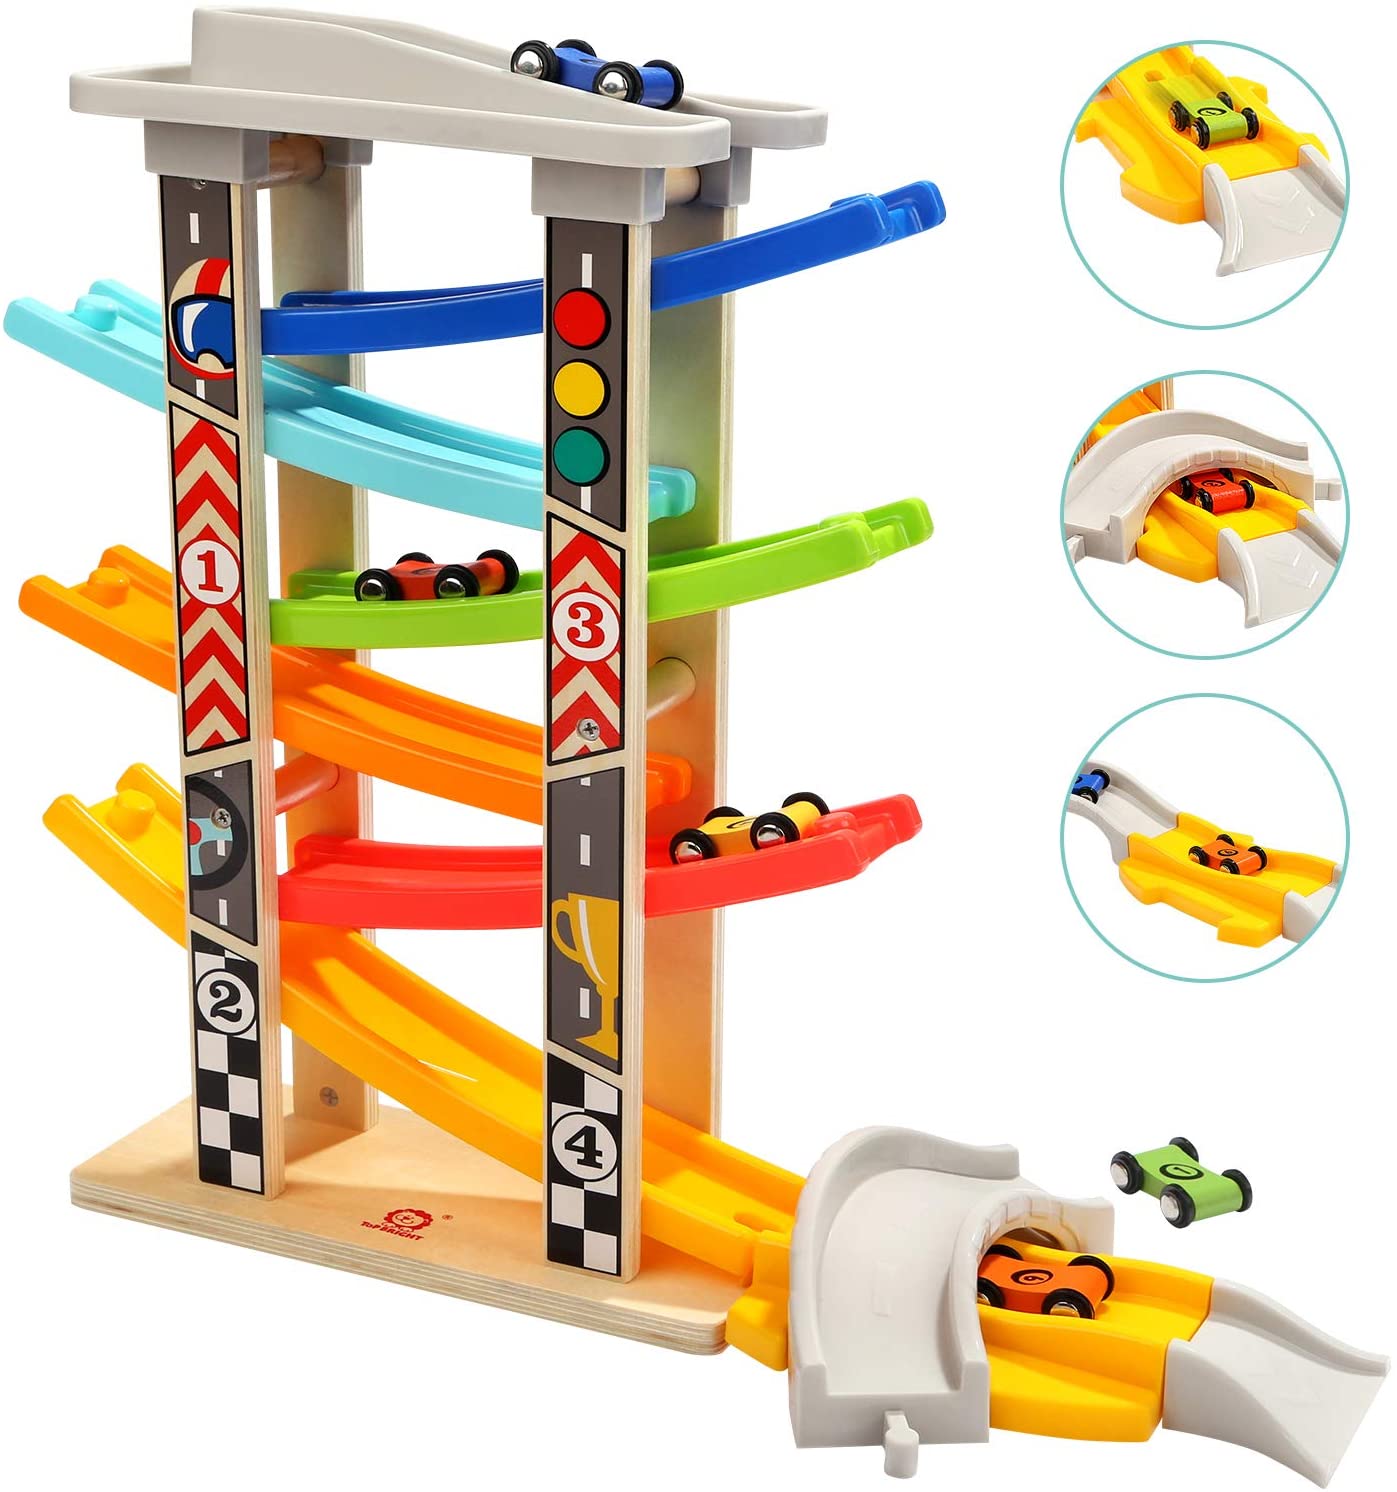 TOP BRIGHT Car Ramp Toy For 3 Year Old Boys And Girls Gift Parking Garage With 